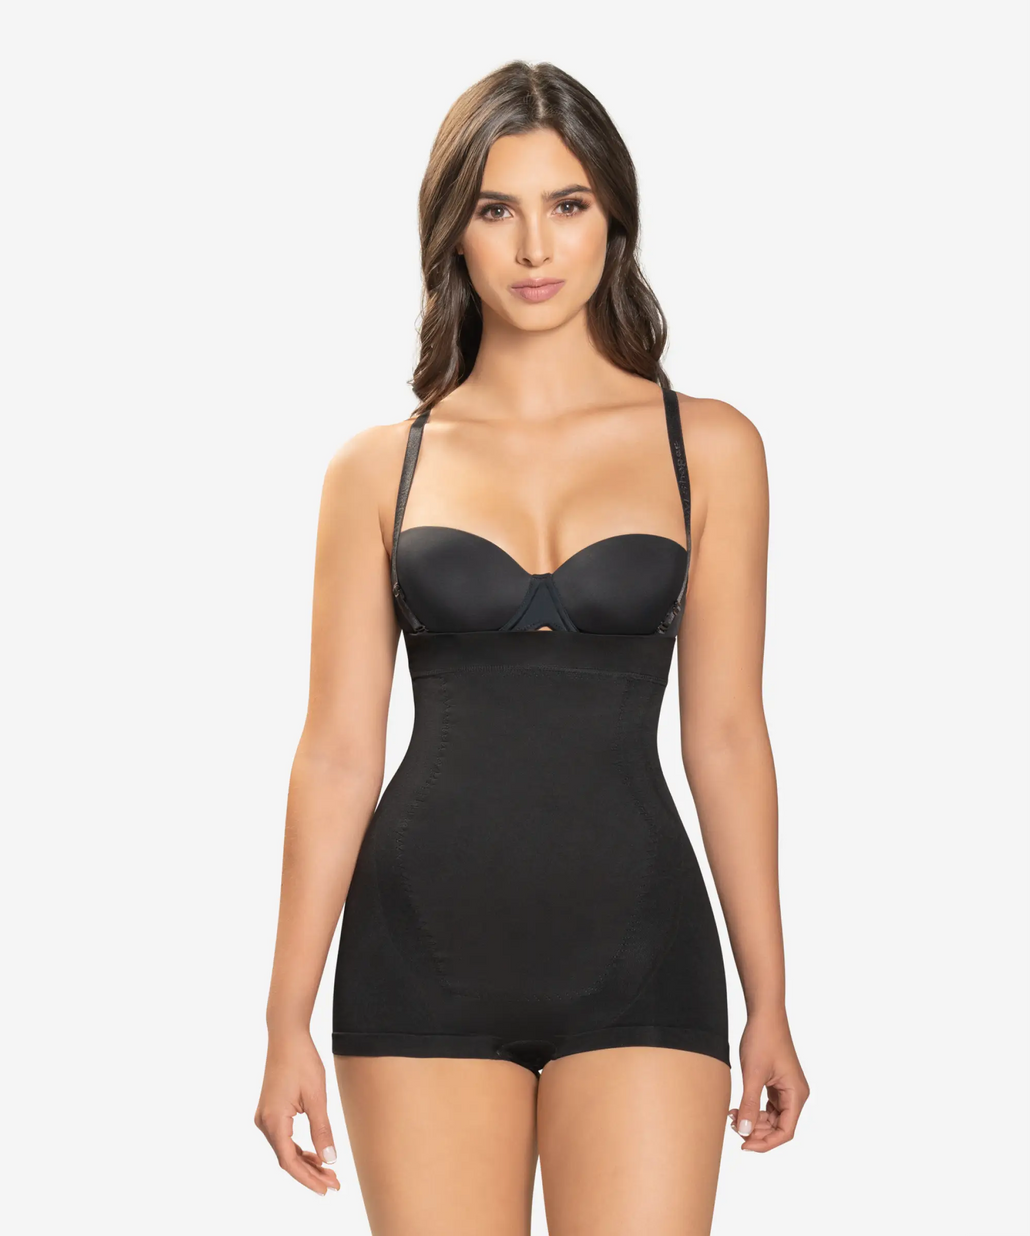 Our shapewear dresses will have you feeling conifdent all night 🖤 #sh, Shapewear Dress